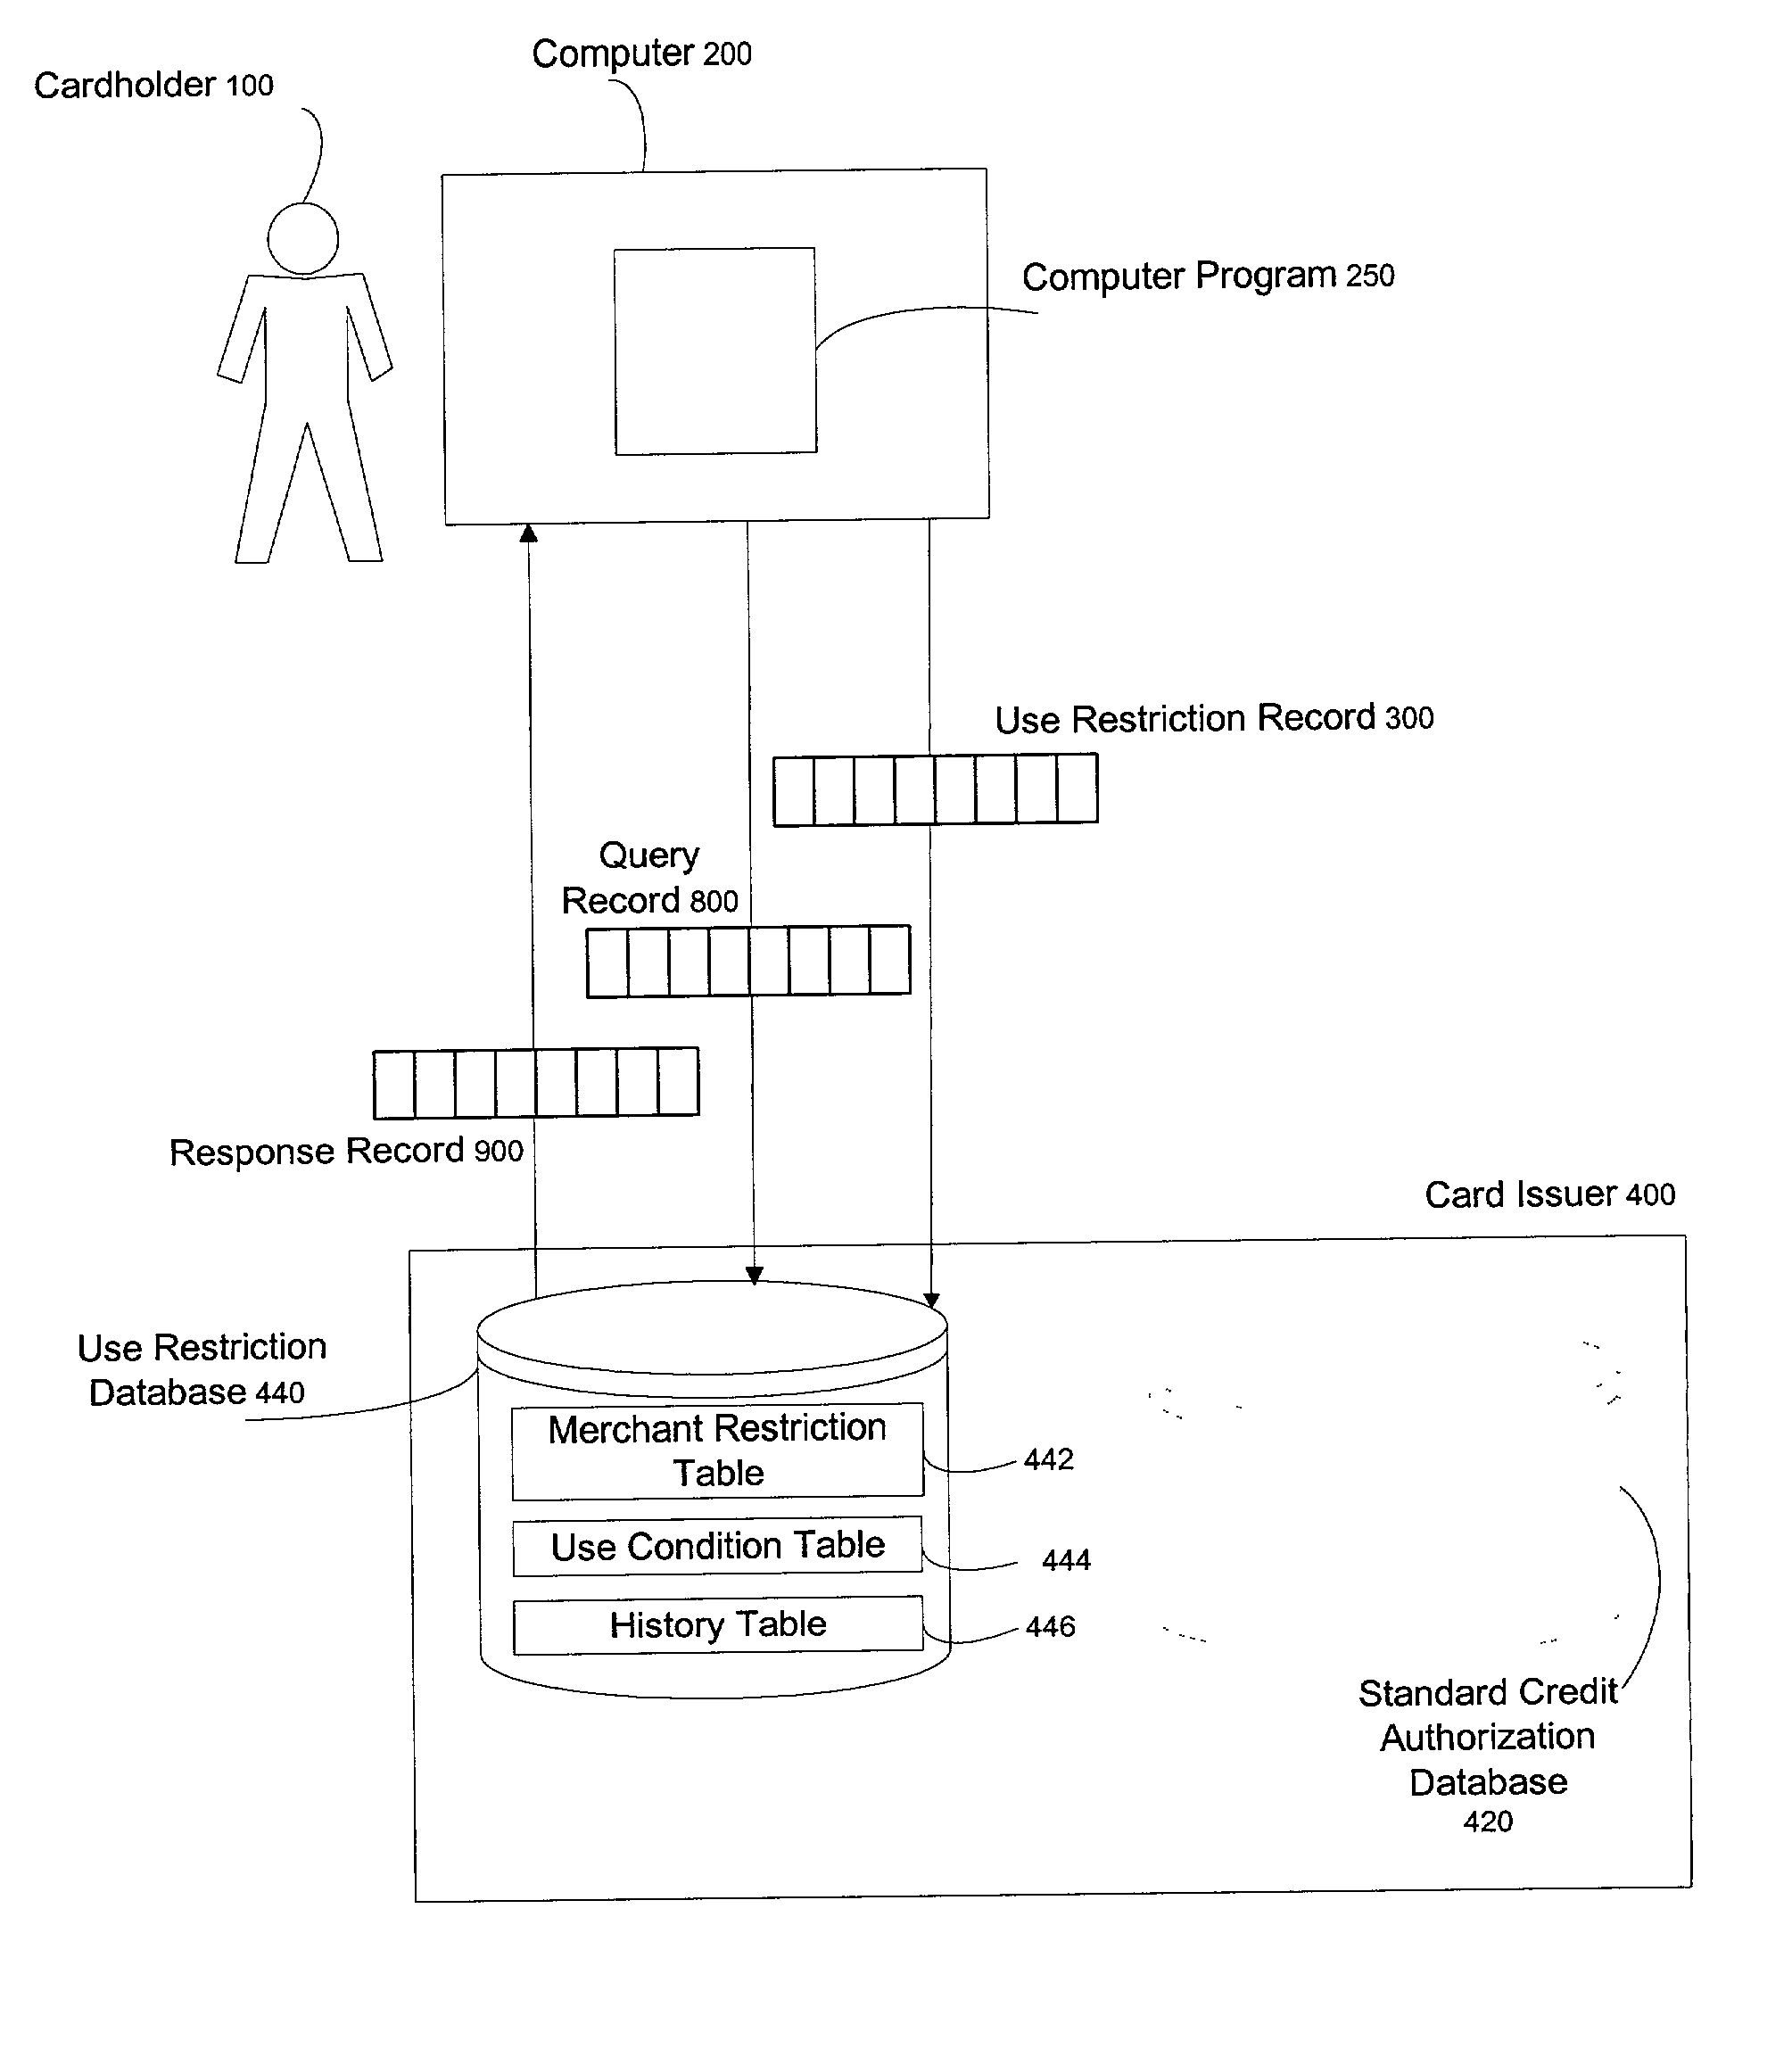 Method for cardholder to place use restrictions on credit card at will